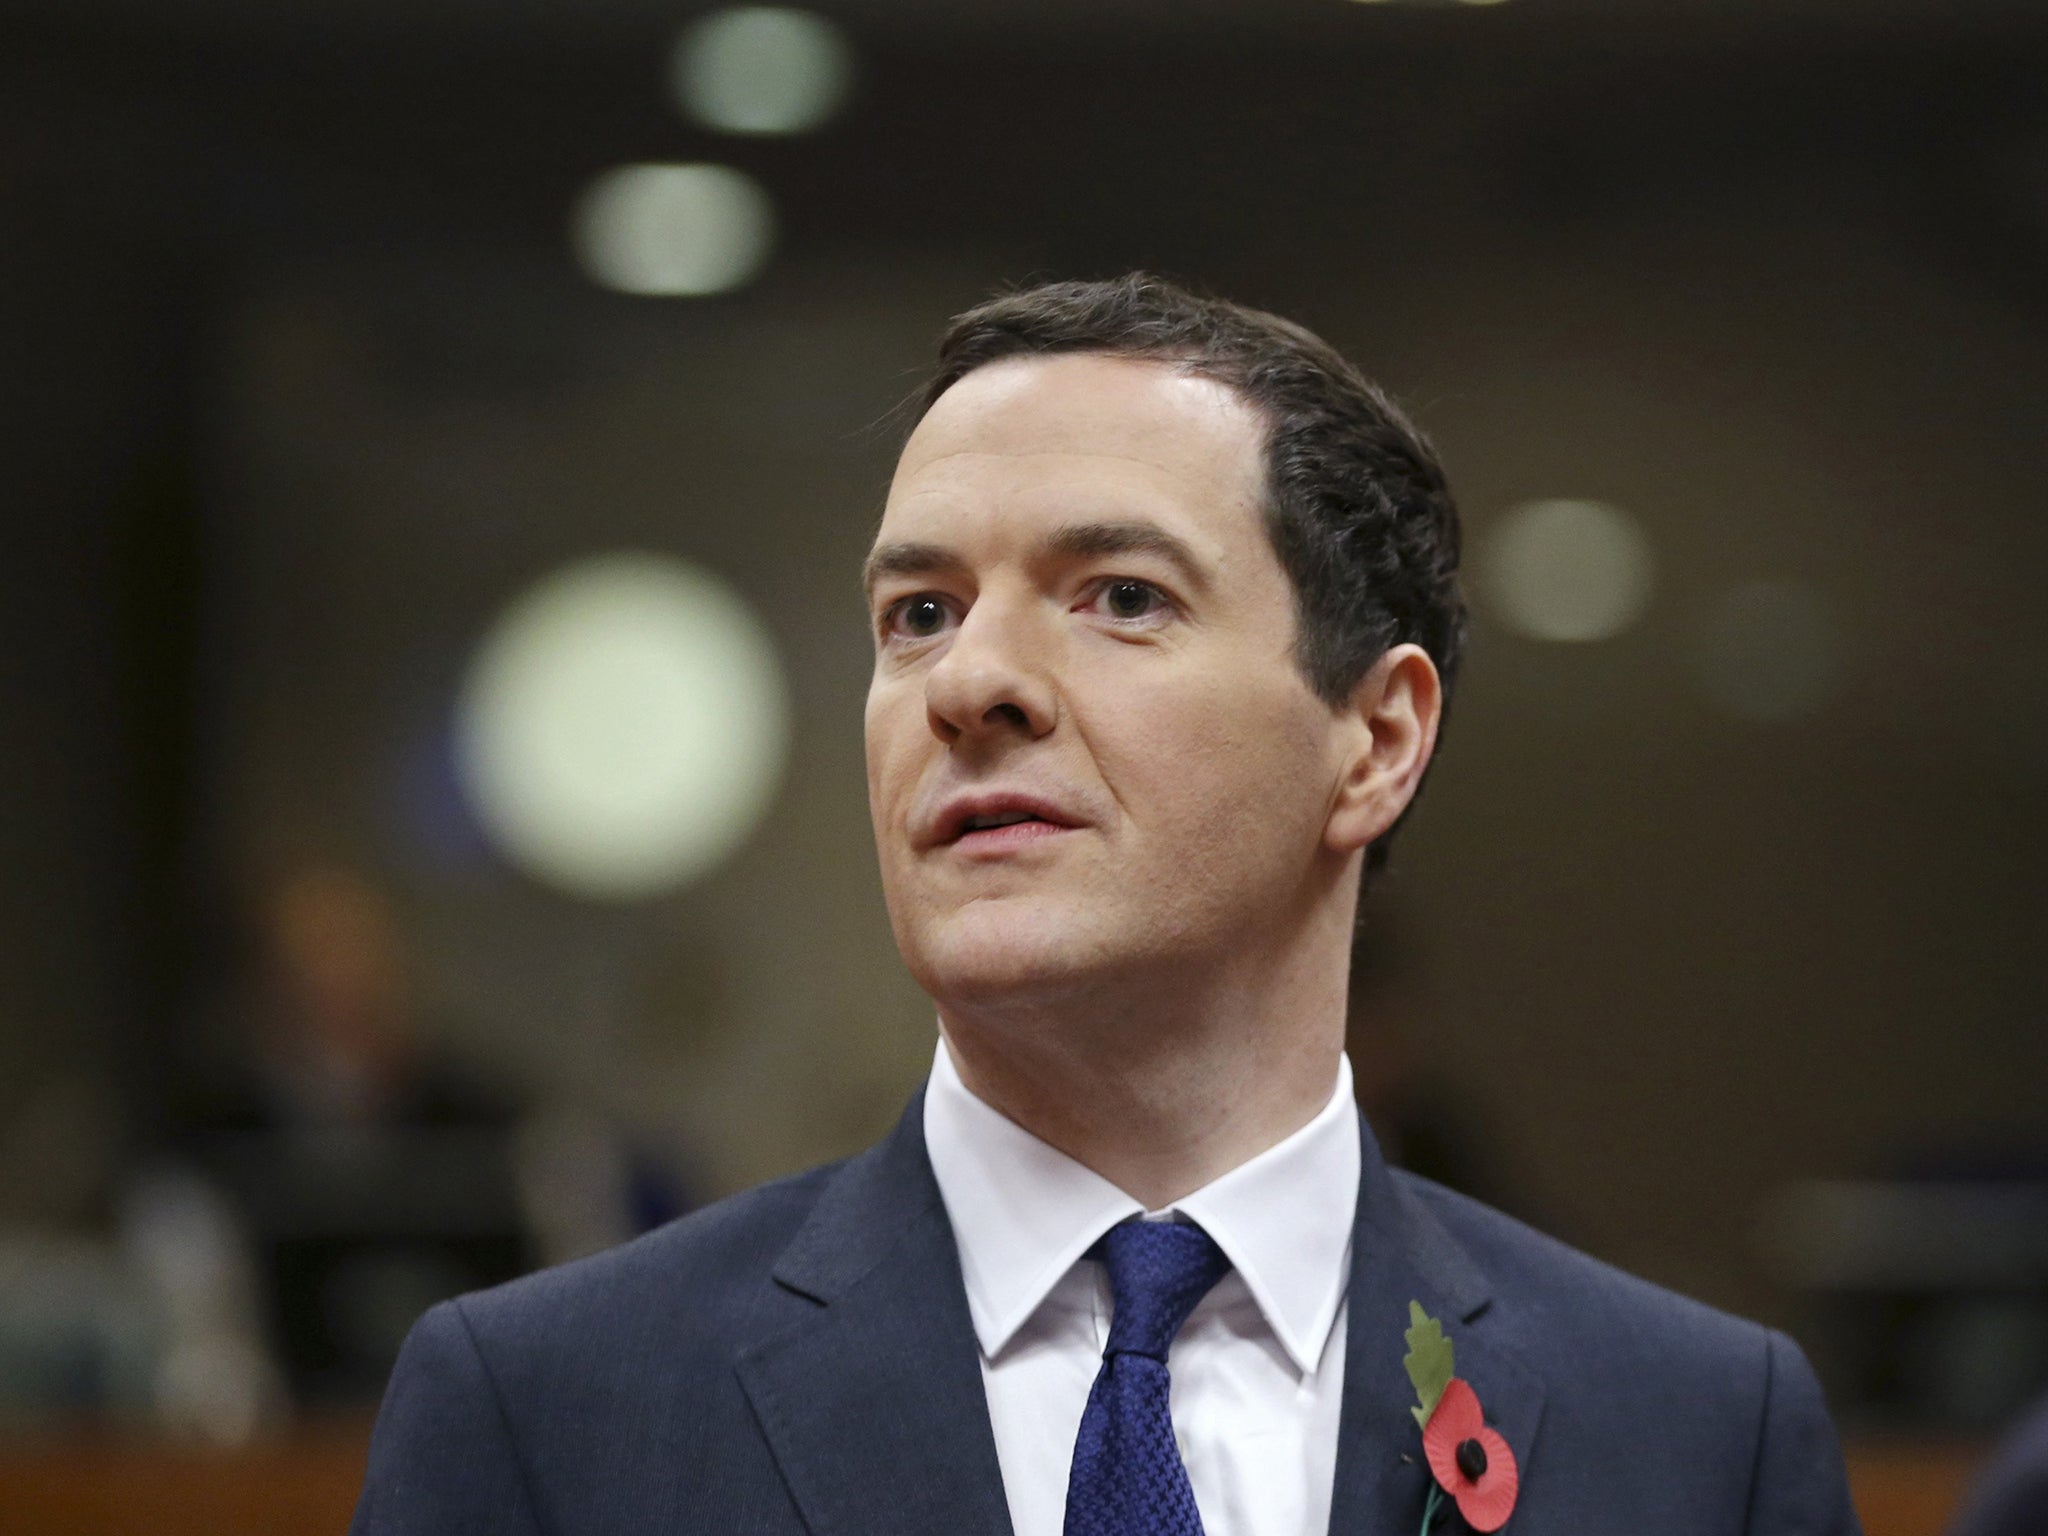 Osborne headed to Brussels under intense pressure from eurosceptic Tory backbenchers to negotiate a lower payment